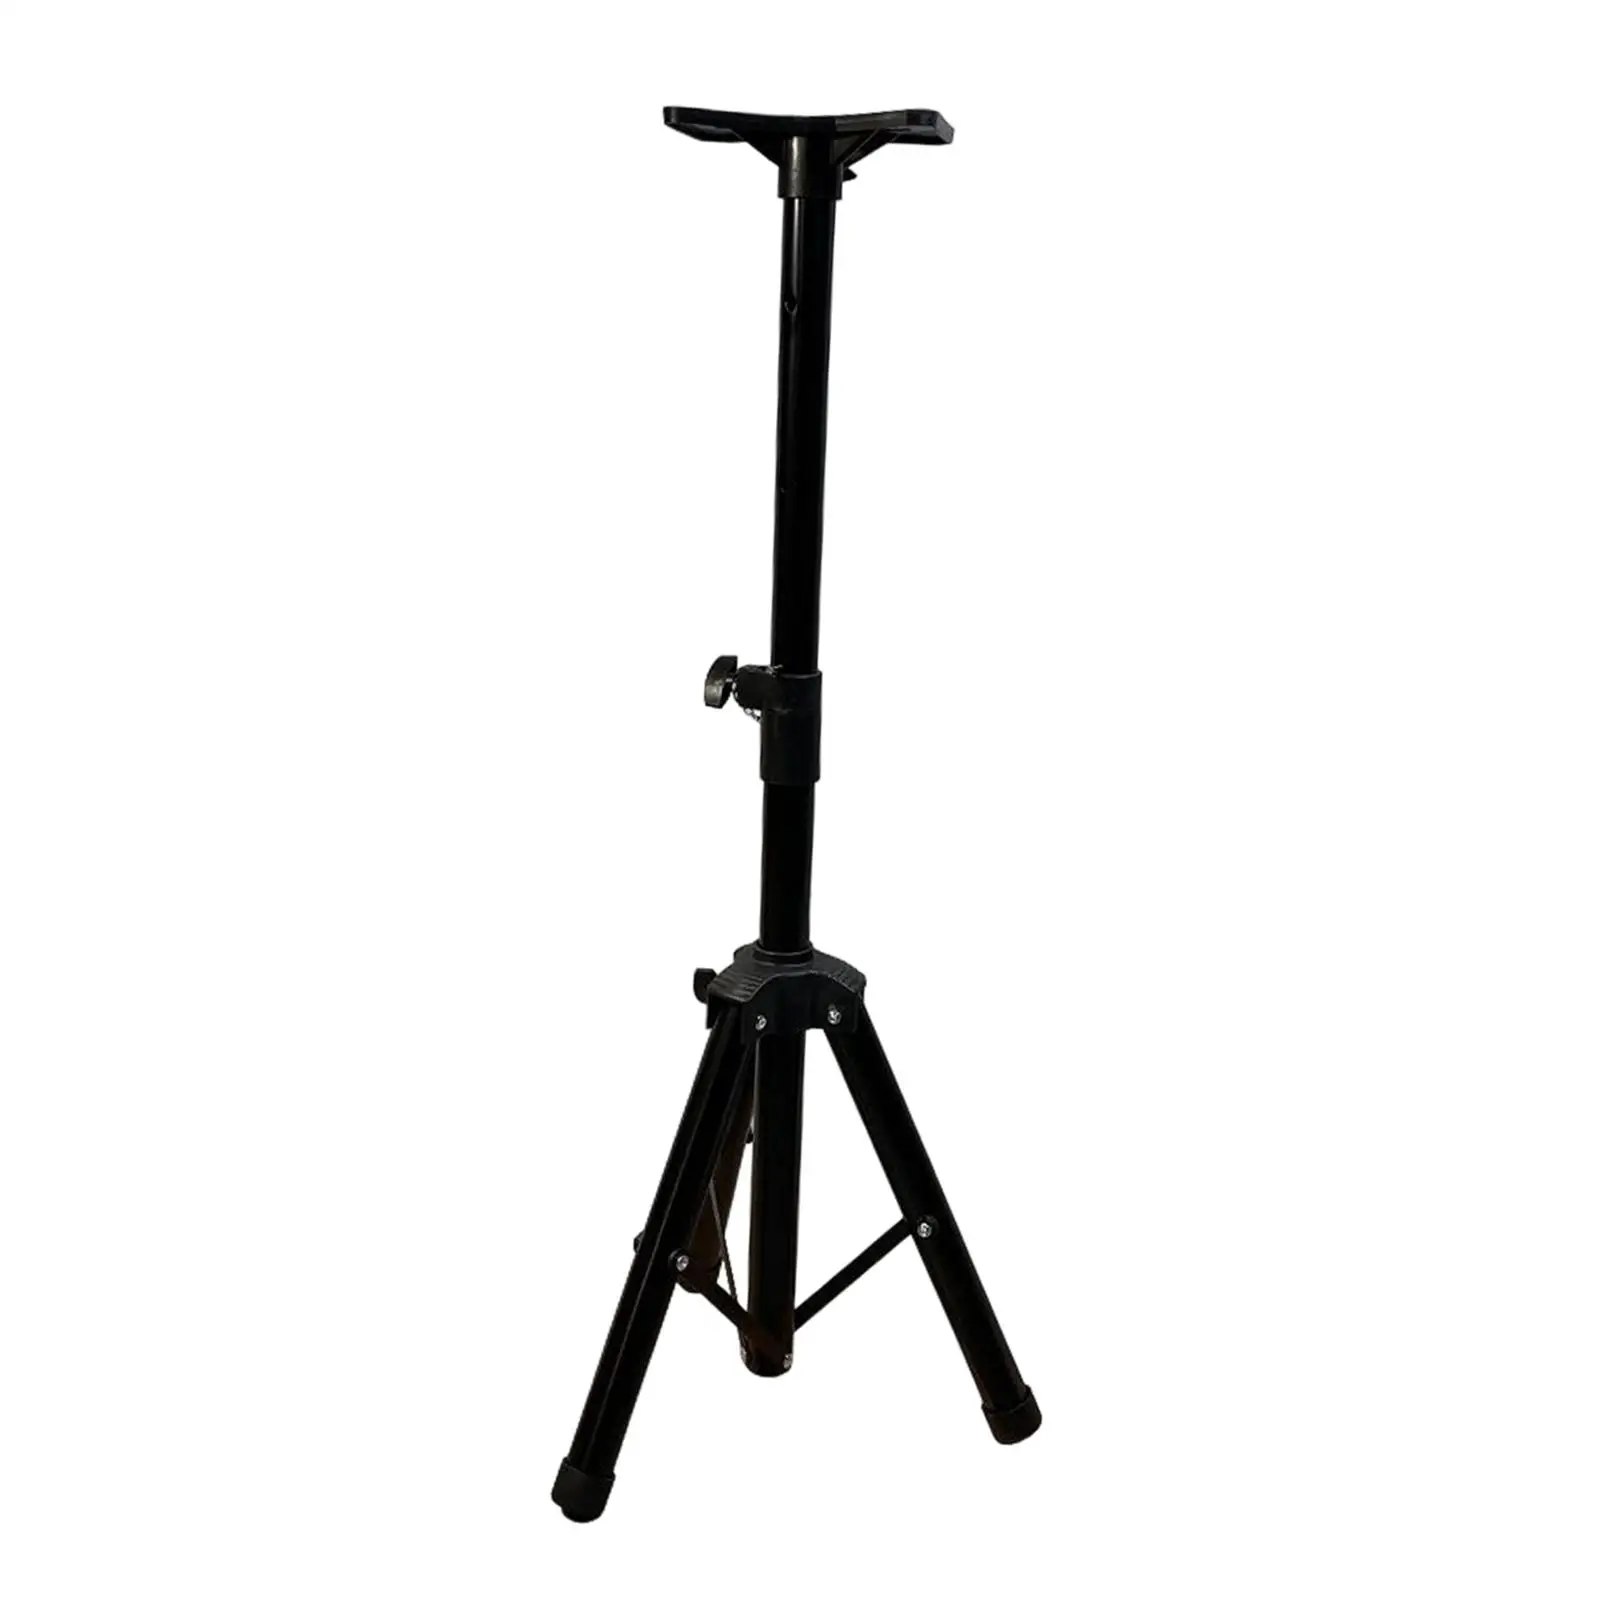 Target Stands Good Bearing Stable Durable 115cm, 98cm,85cm,78cm Bracket Plastic Interactive Toys for Indoor Outdoor Training